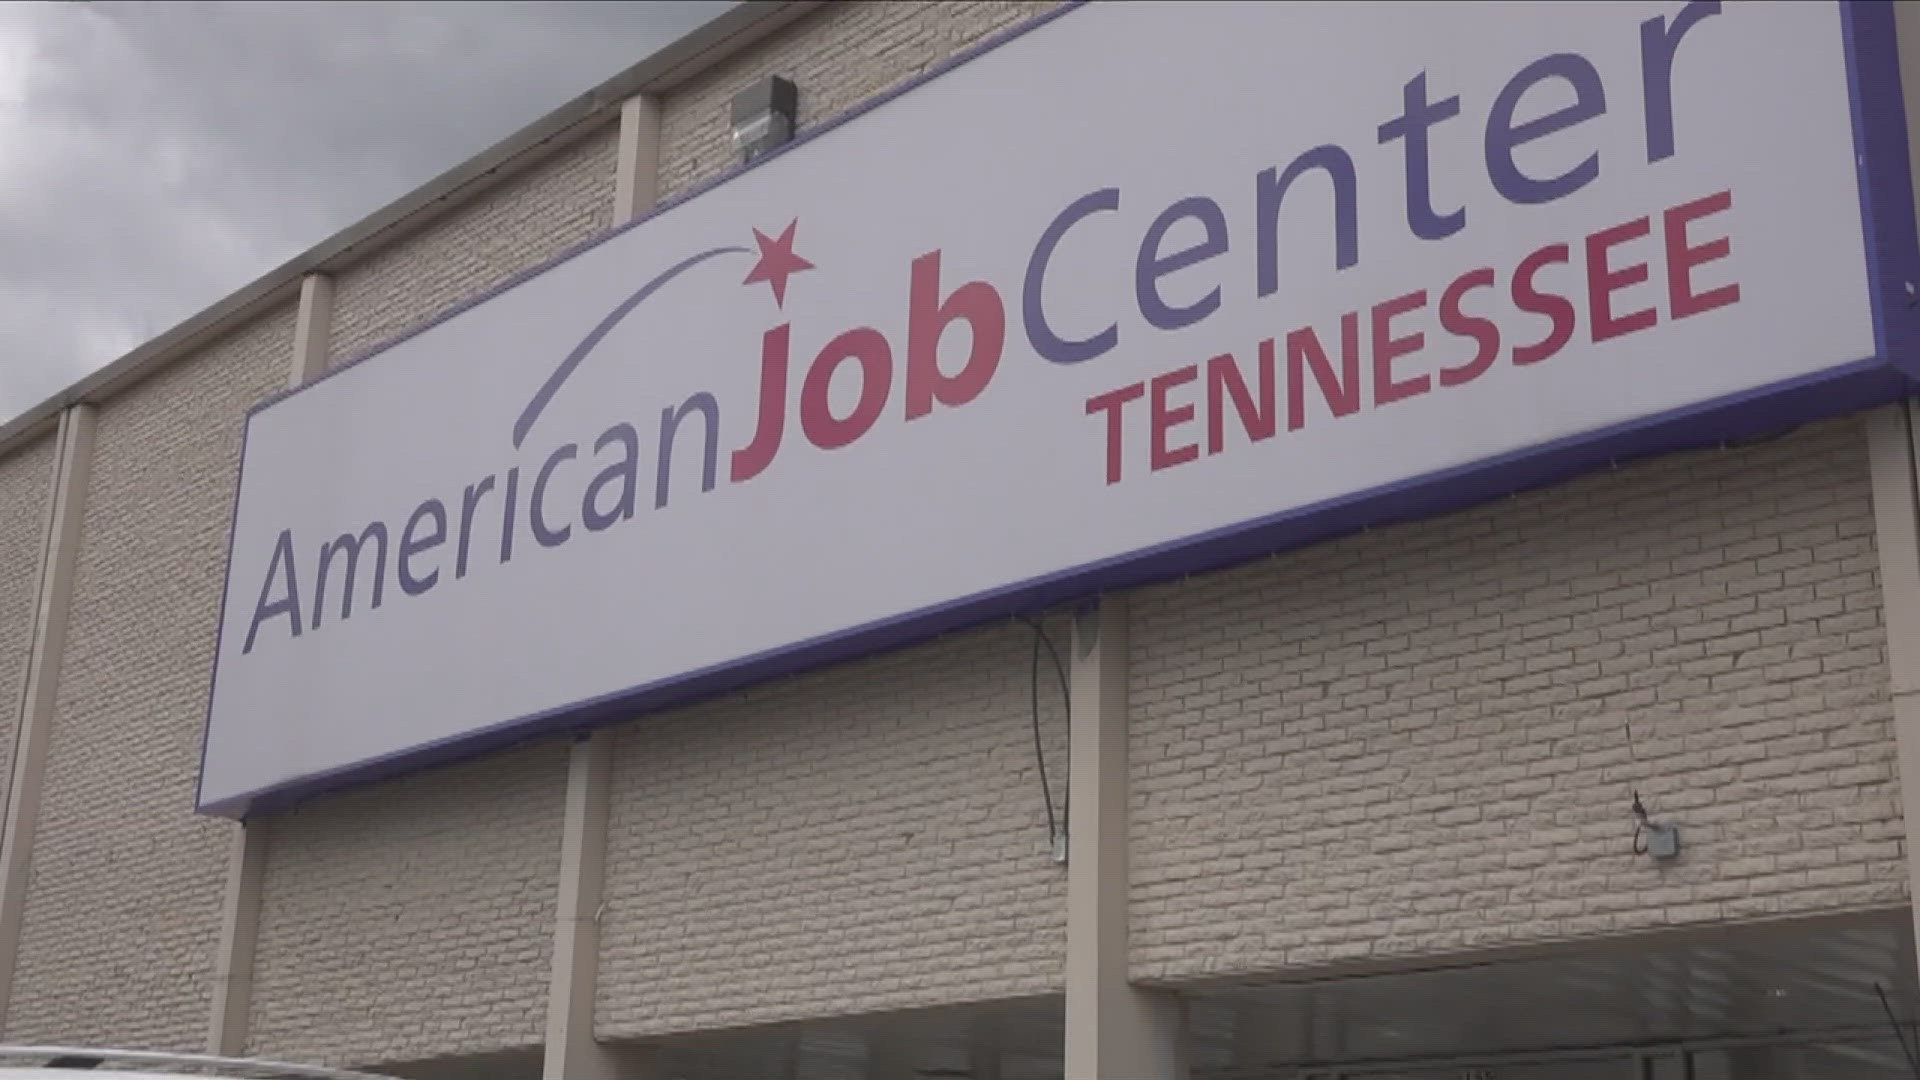 ABC24 went inside the American Job Center of Greater Memphis, to look at how the organization helps people through the process of layoffs.